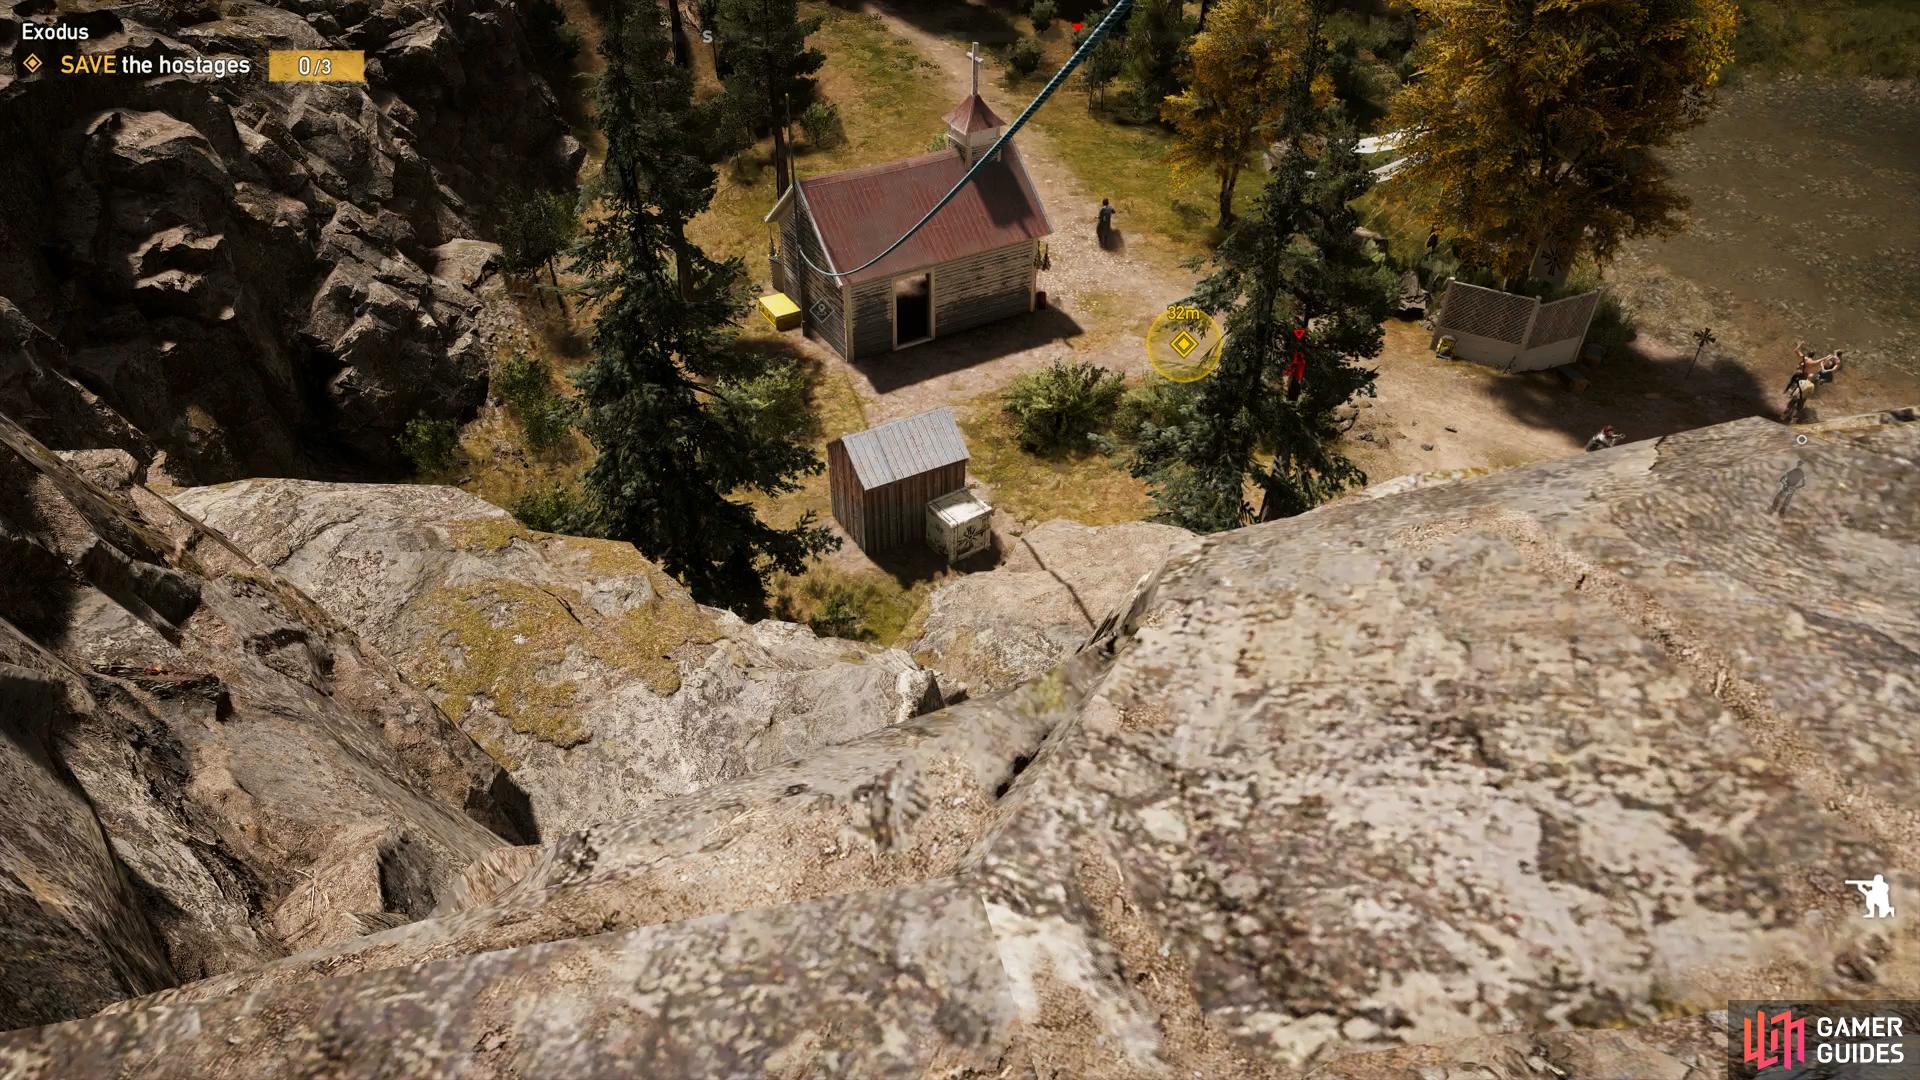 Take the zipline down to approach silently